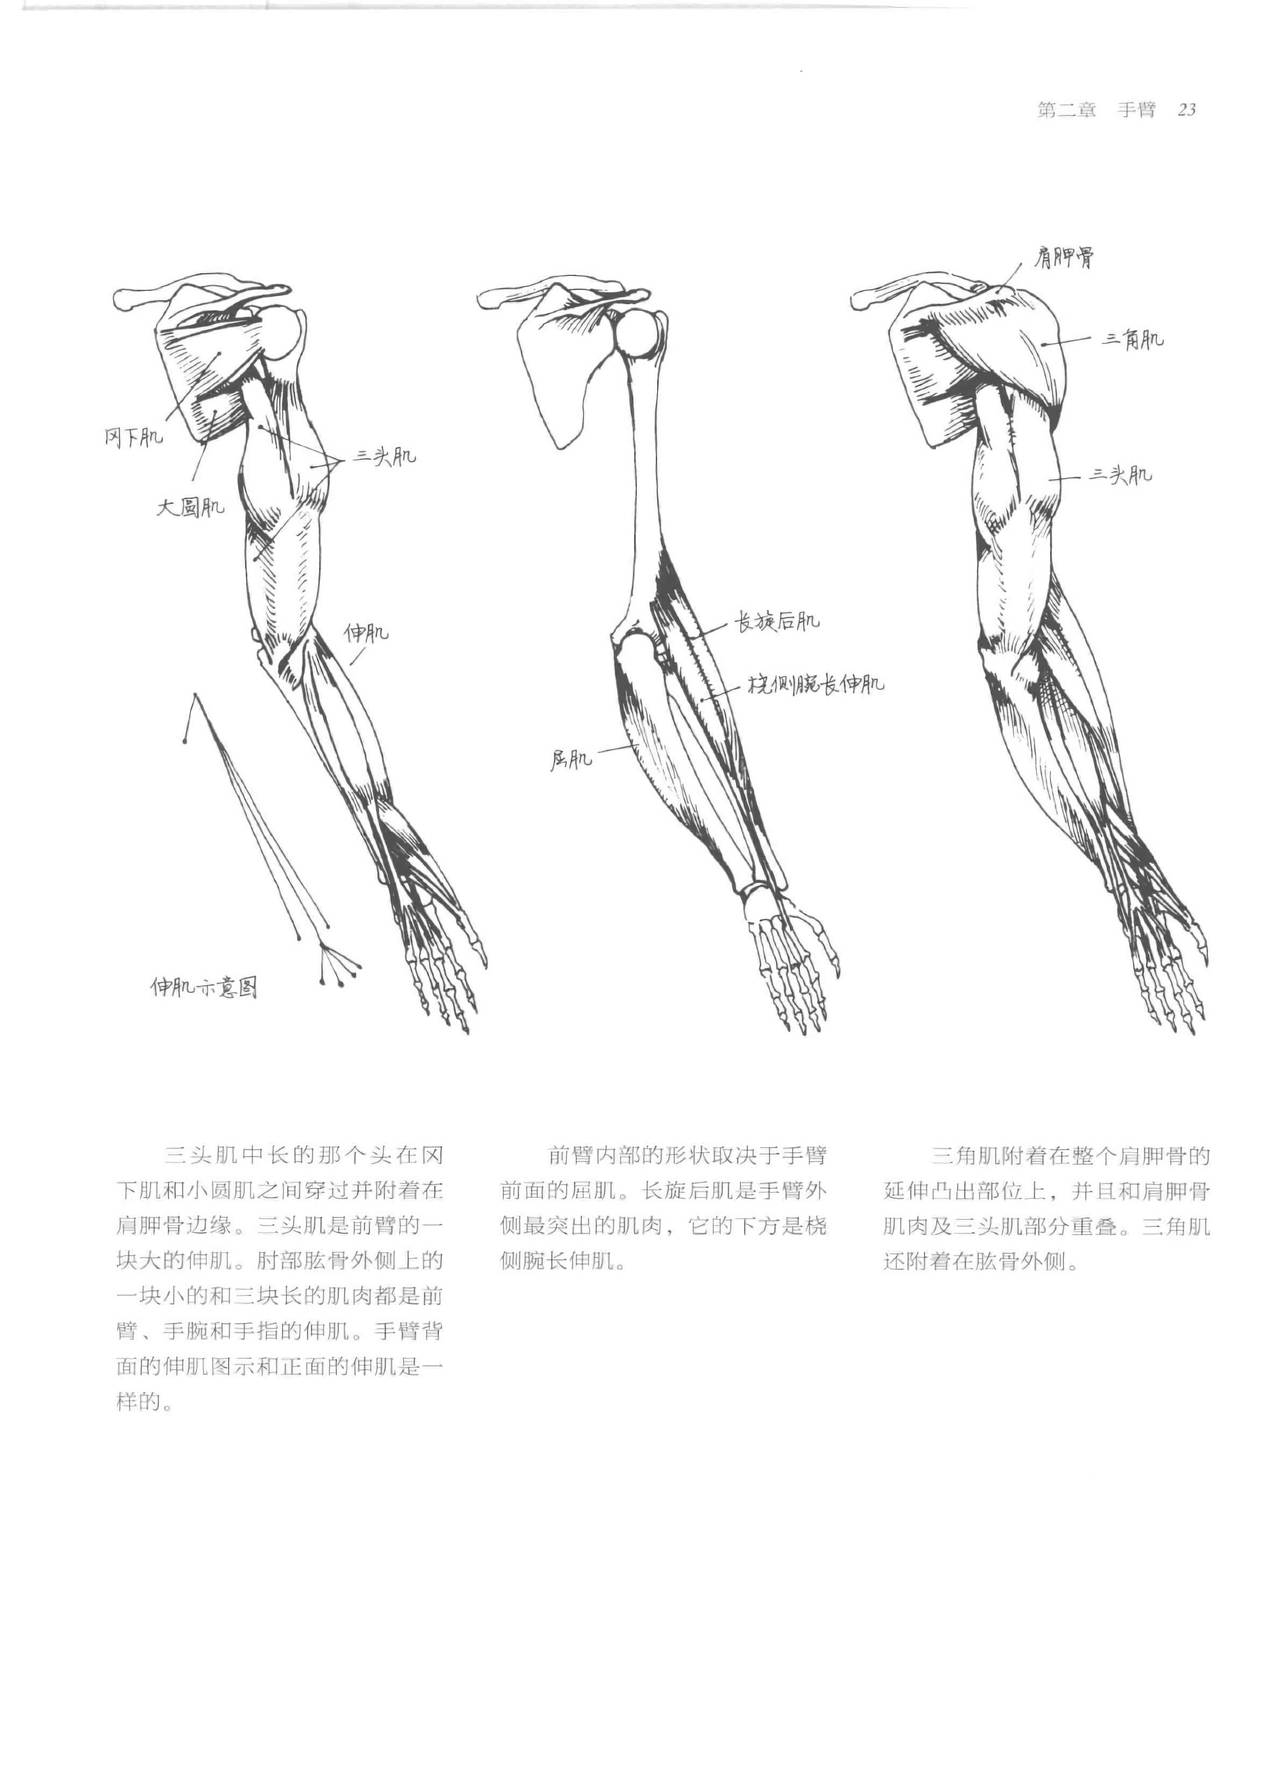 Anatomy-A Complete Guide for Artists - Joseph Sheppard [Chinese] 23